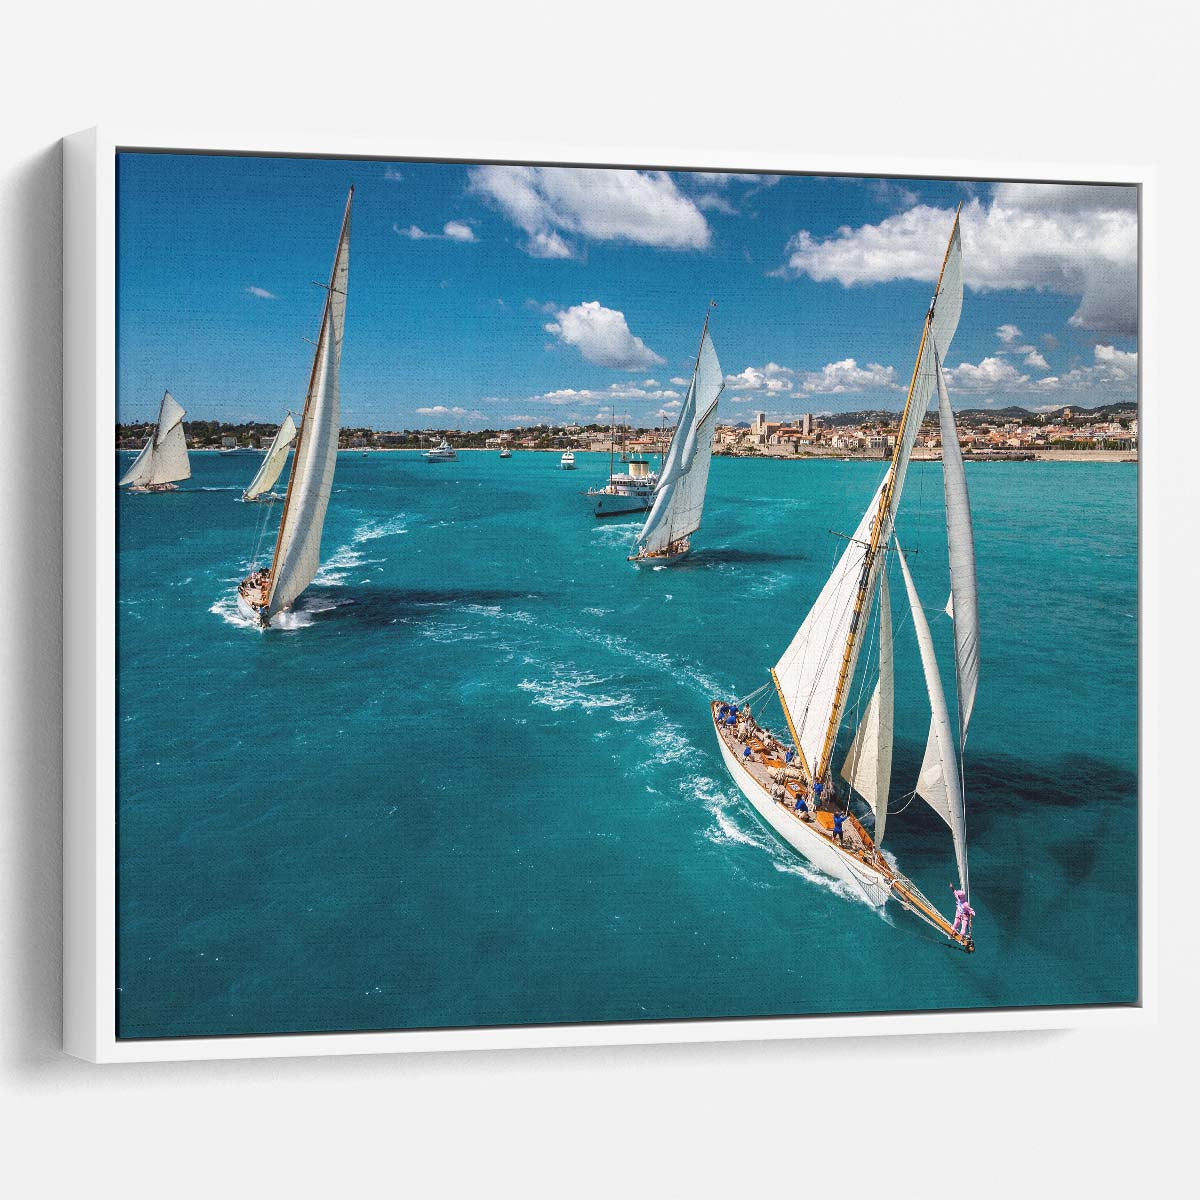 Antibes Yacht Race Aerial Seascape Wall Art by Luxuriance Designs. Made in USA.